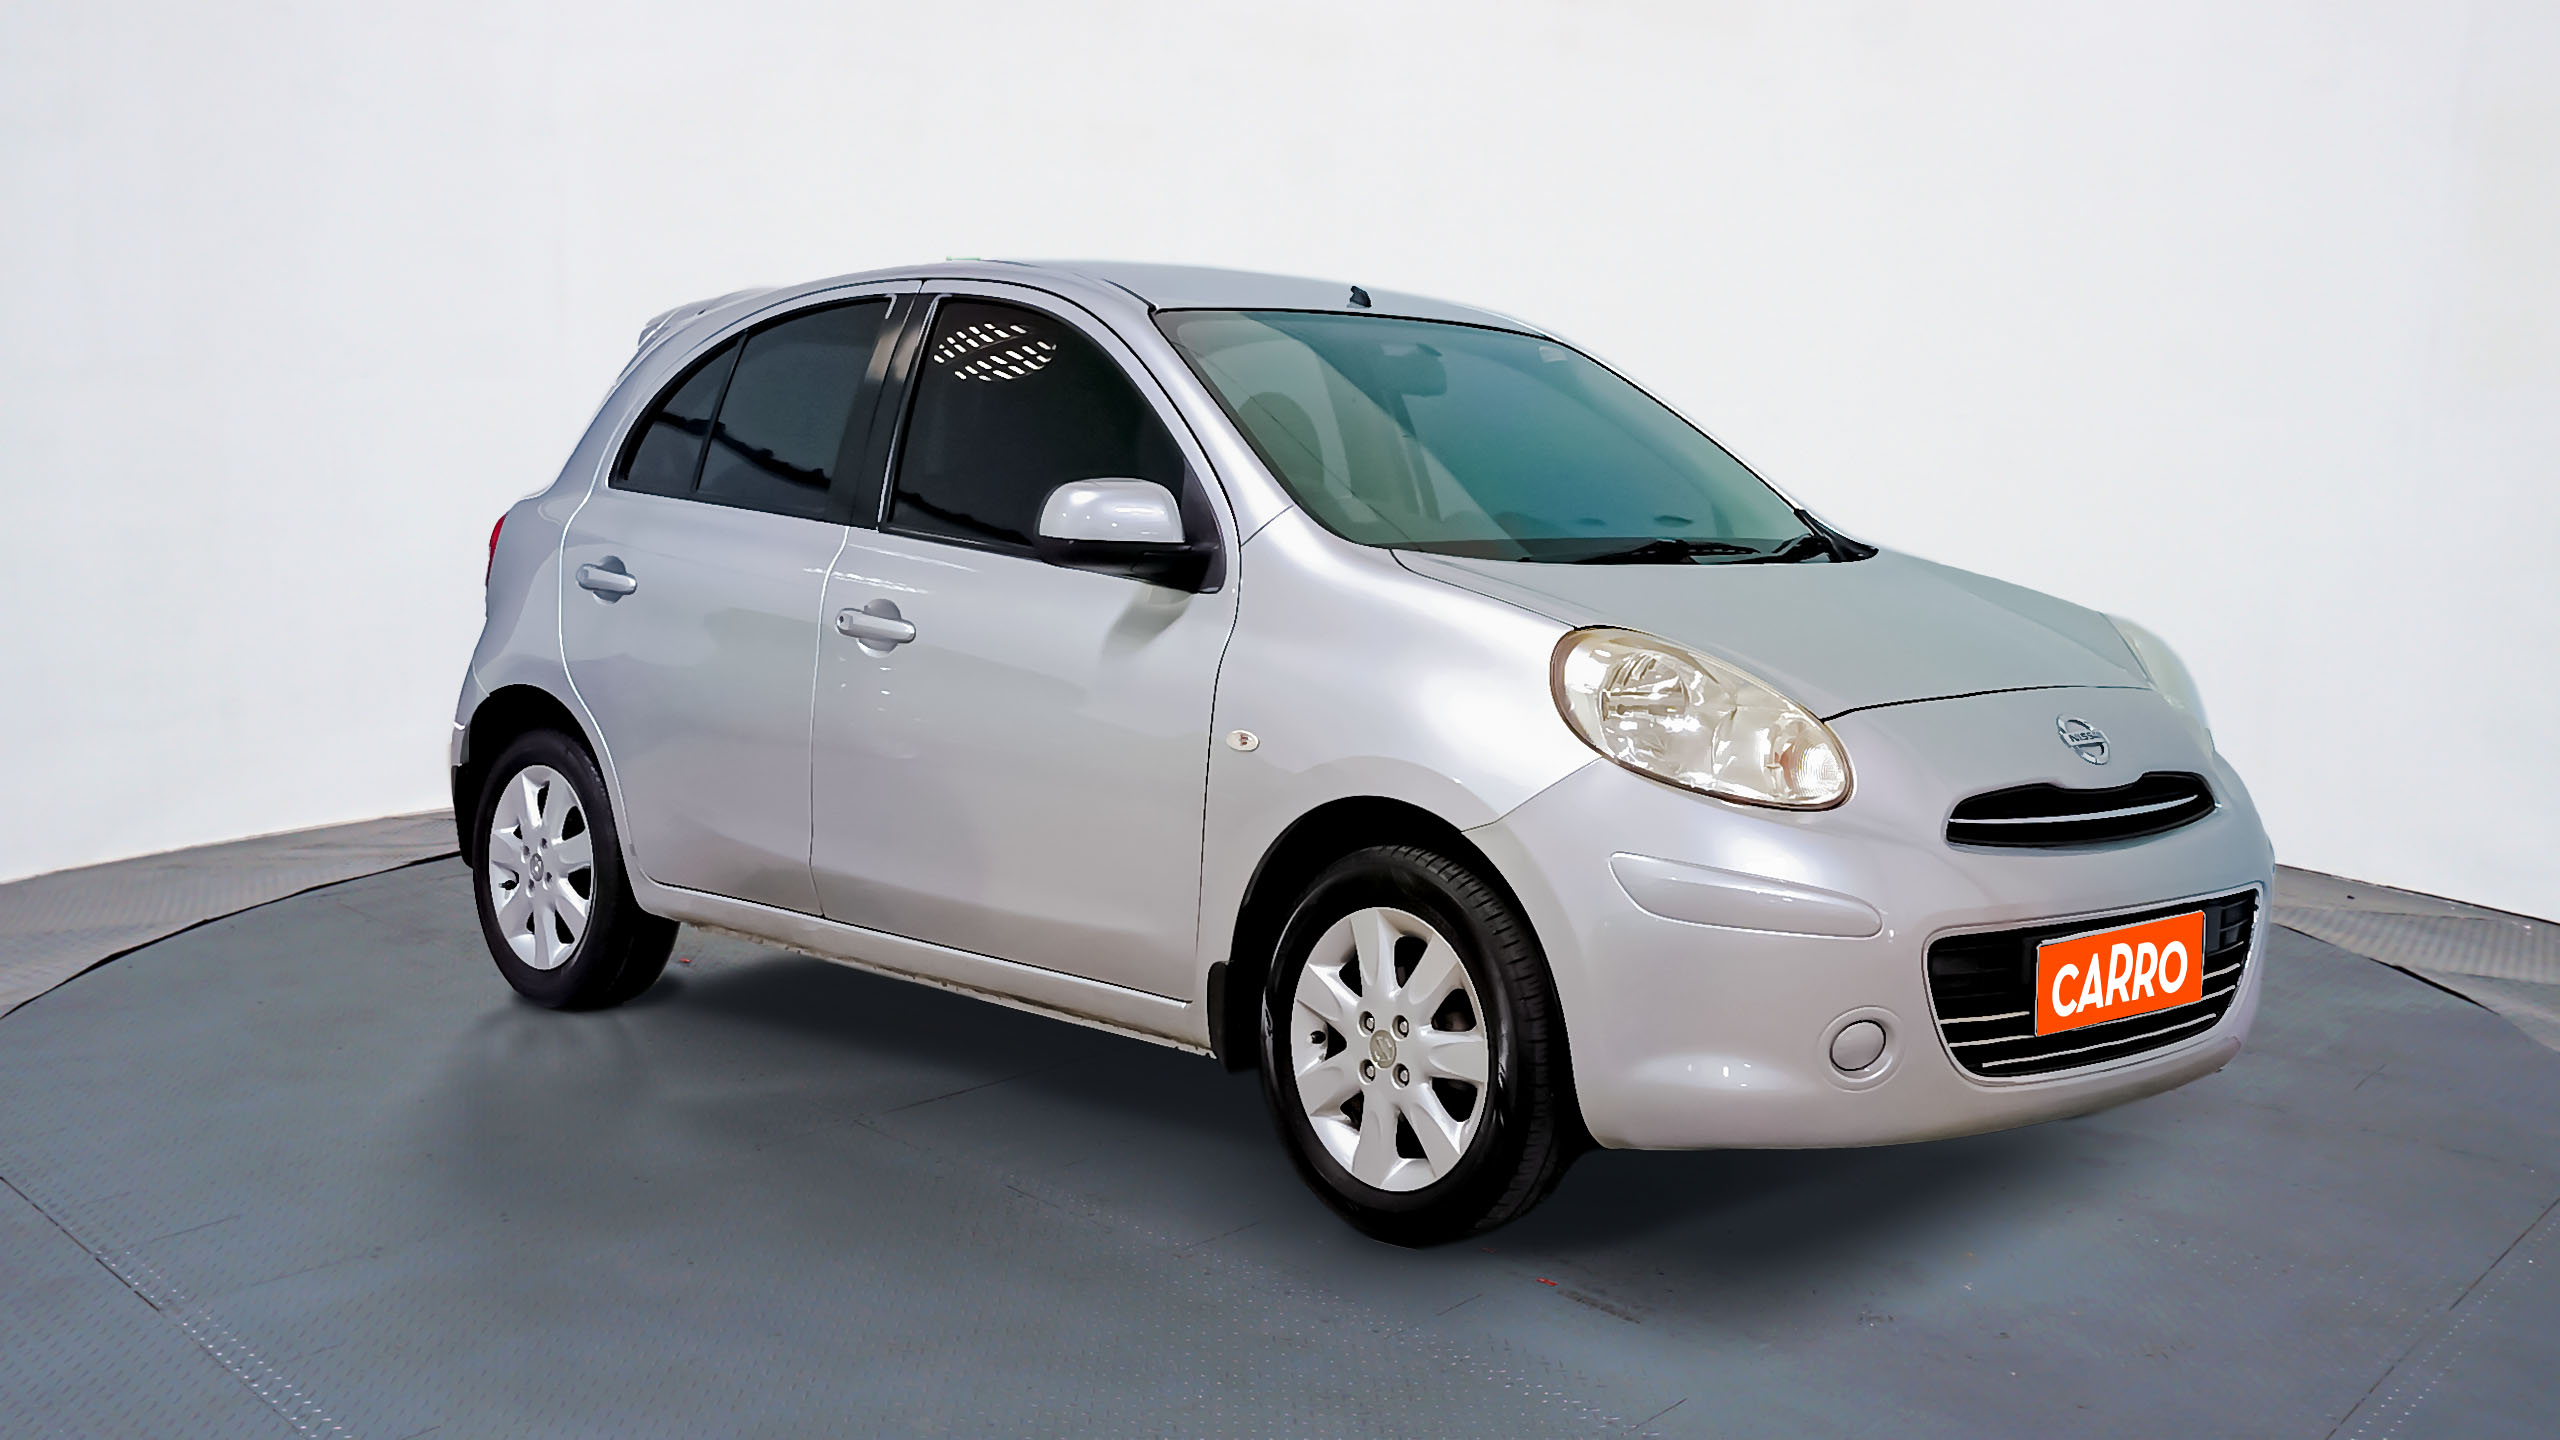 2011 Nissan March  1.2 AT